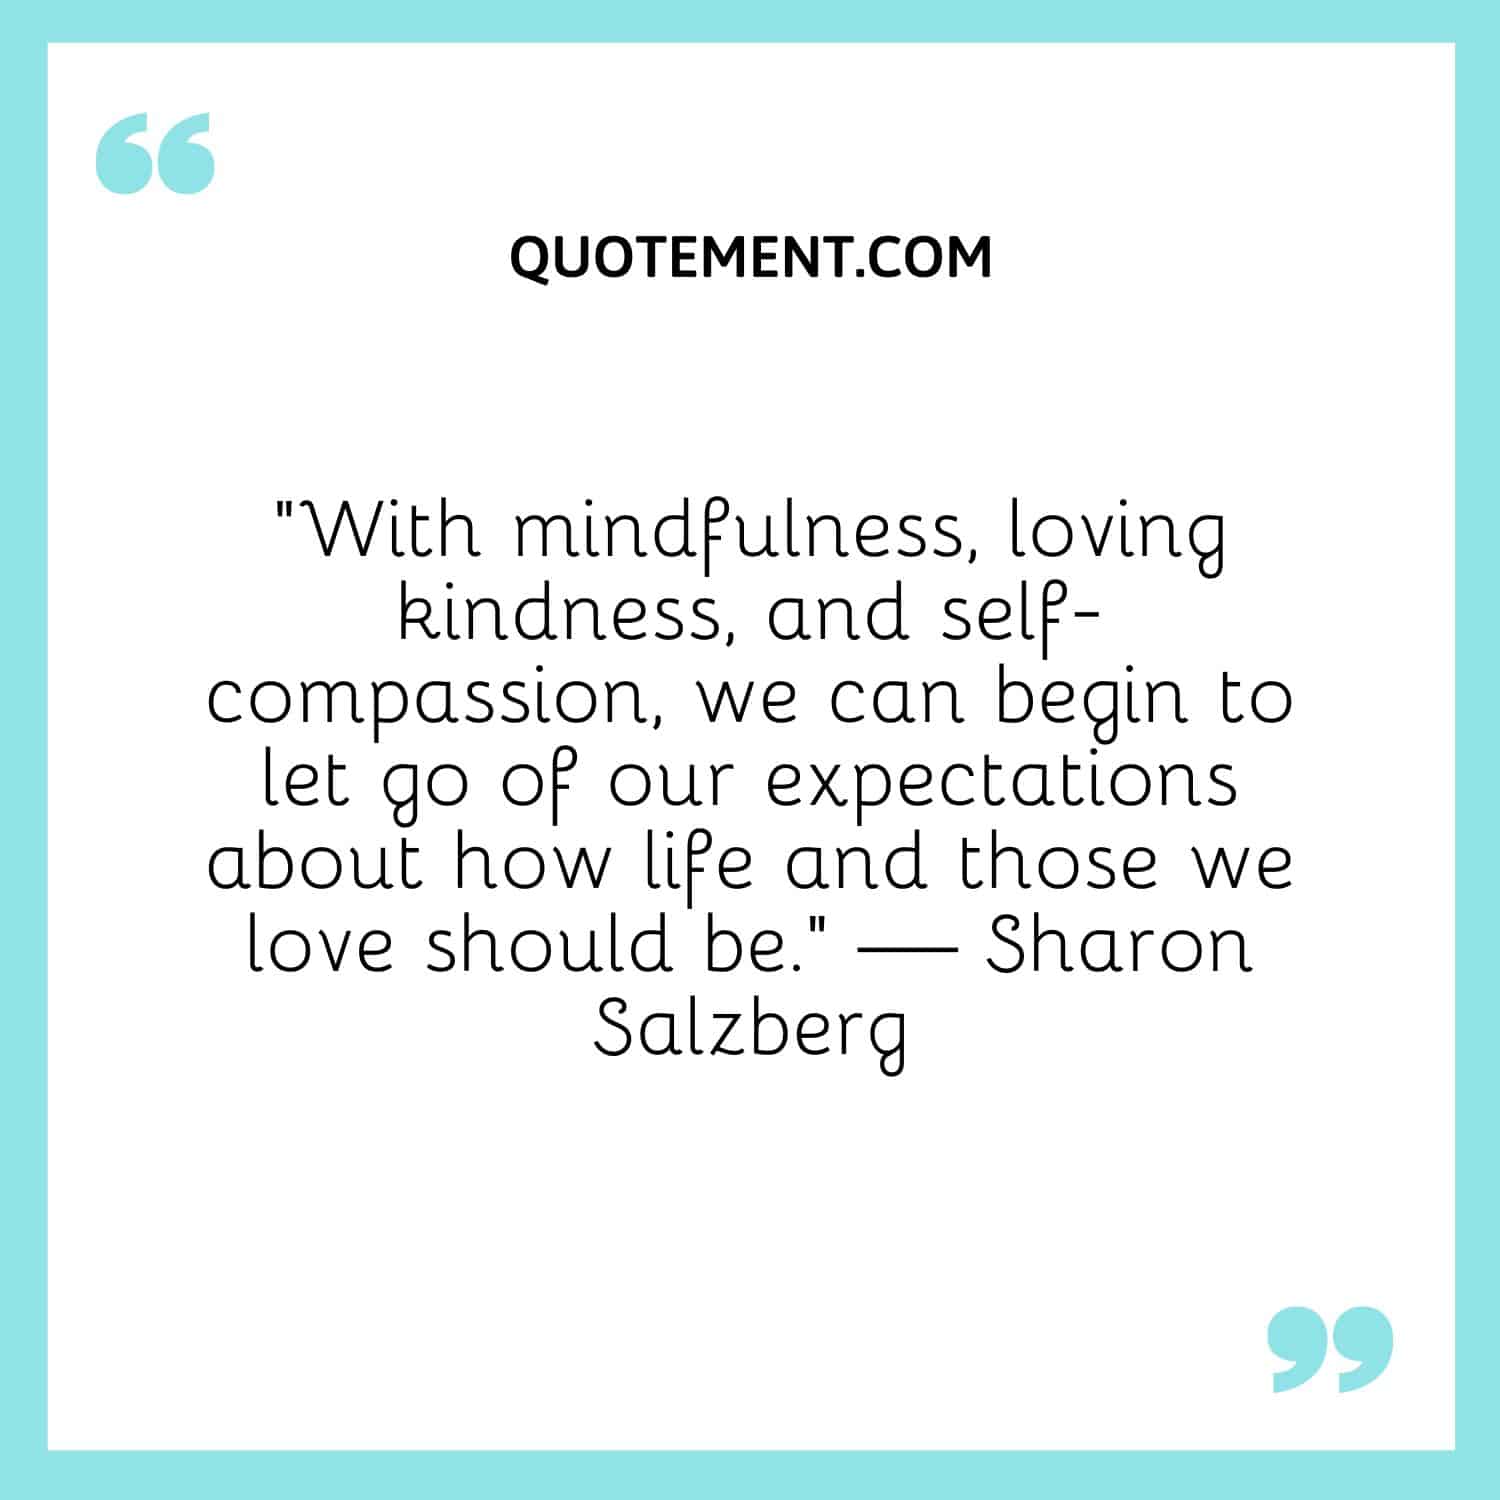 With mindfulness, loving kindness, and self-compassion, we can begin to let go of our expectations about how life and those we love should be